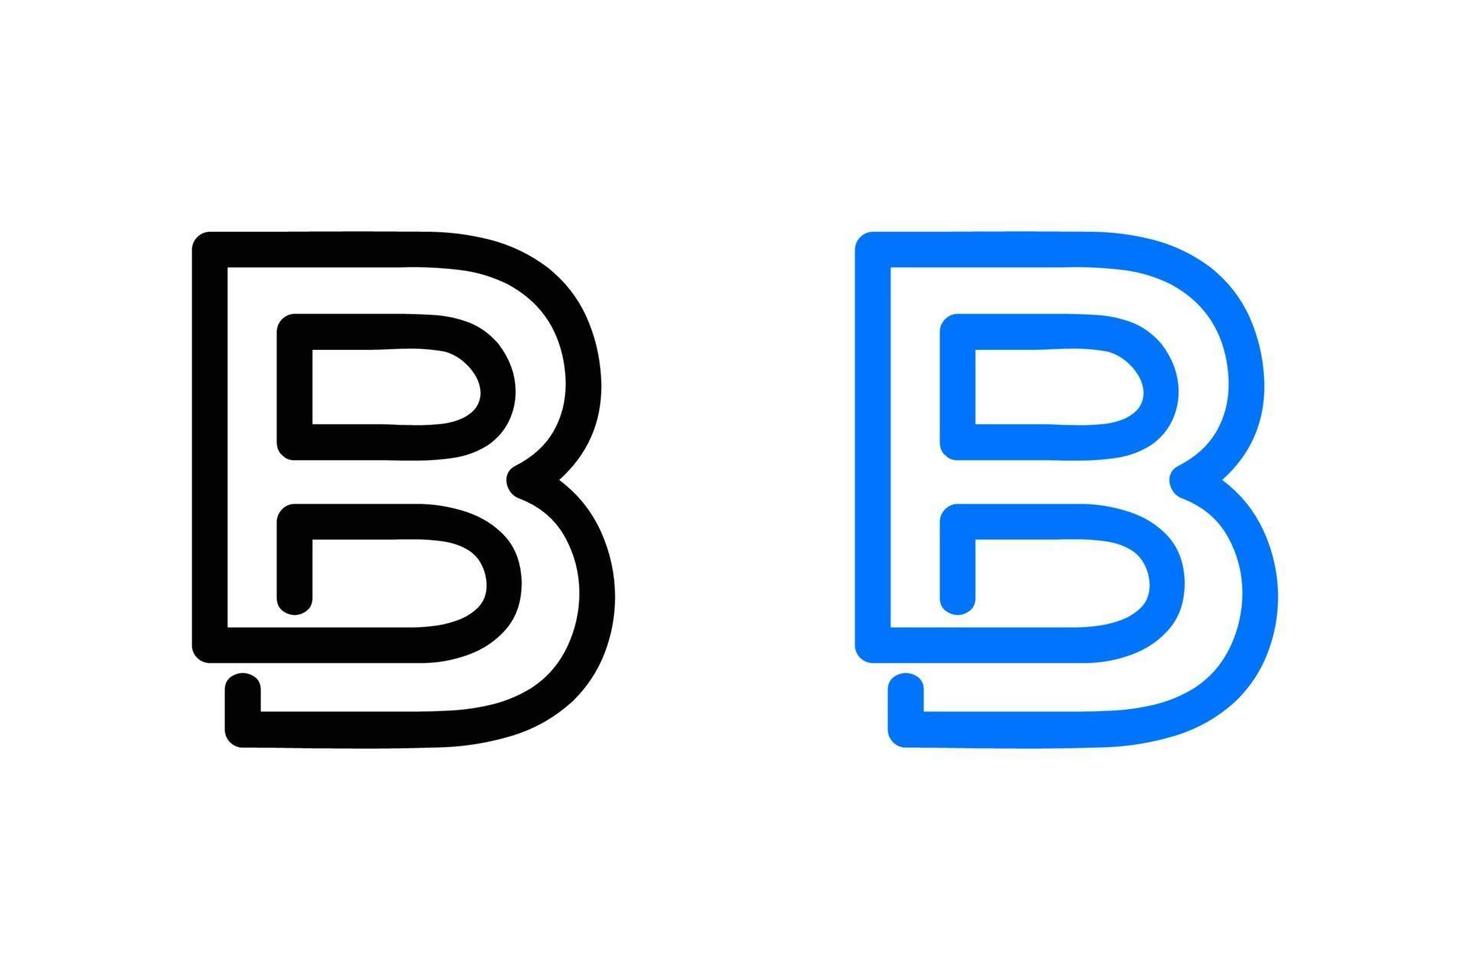 Outline Letter B Abstract Design vector